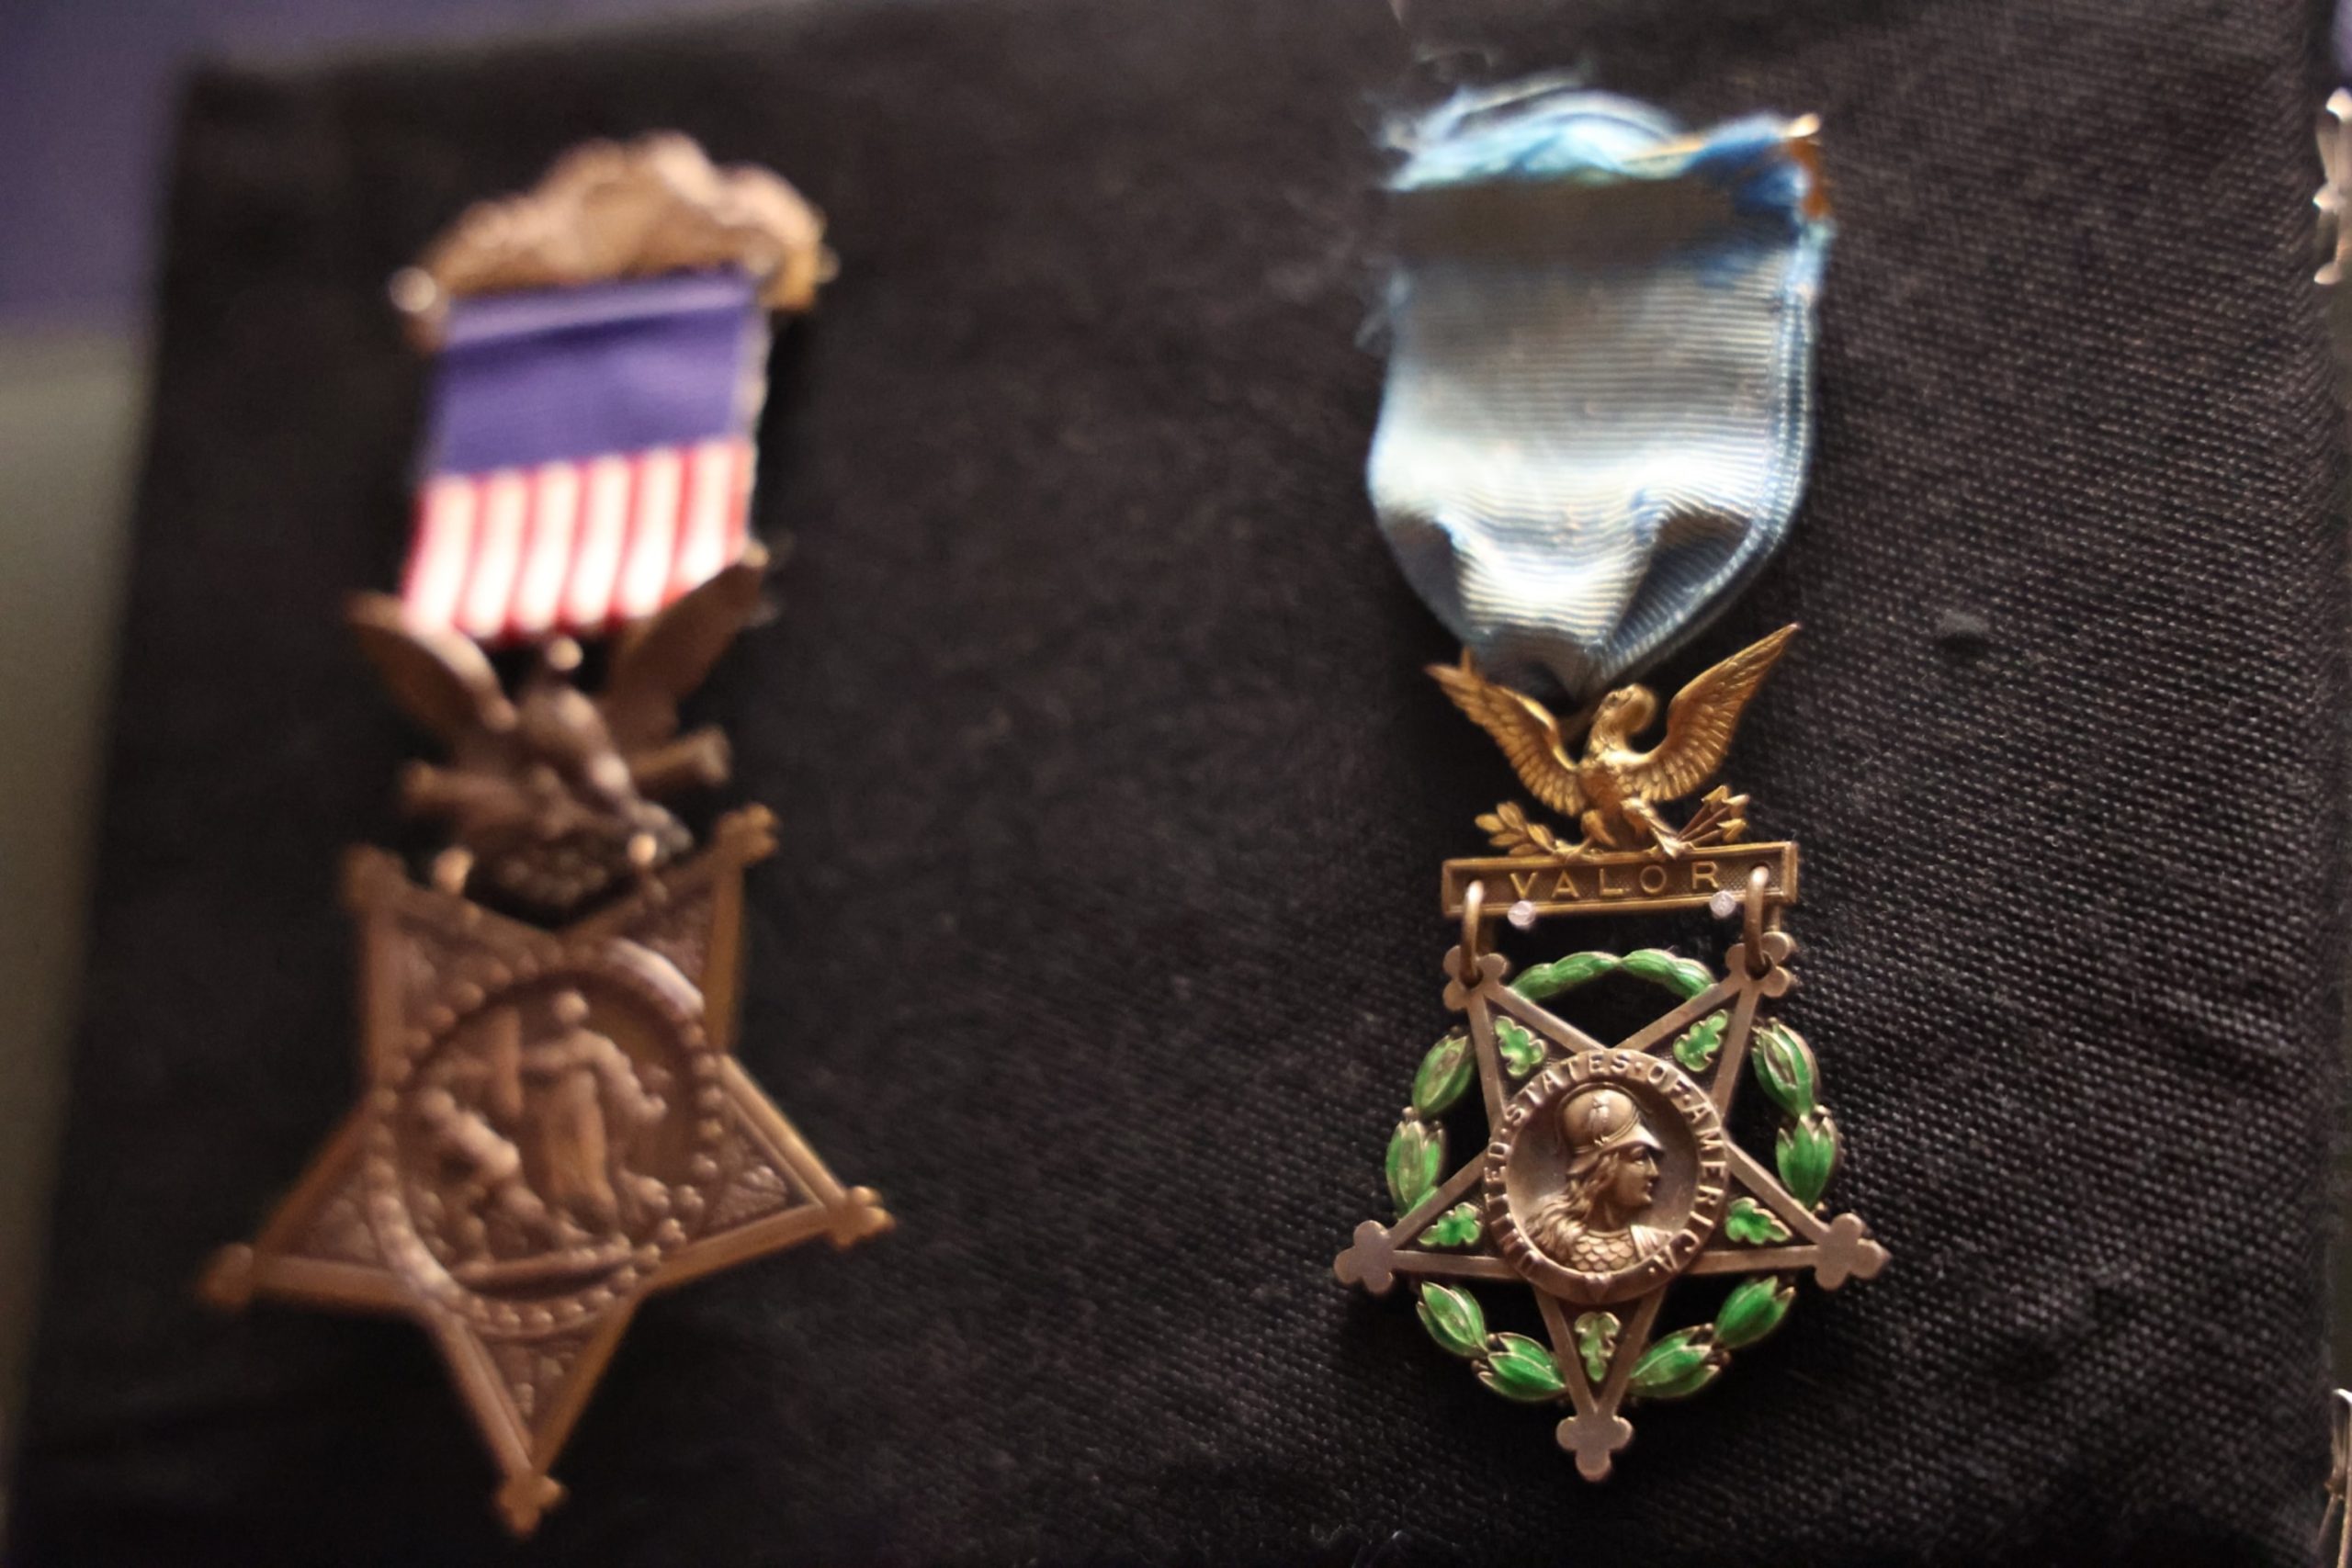 Biden to posthumously award Medal of Honor to Civil War heroes 162 years after their bravery